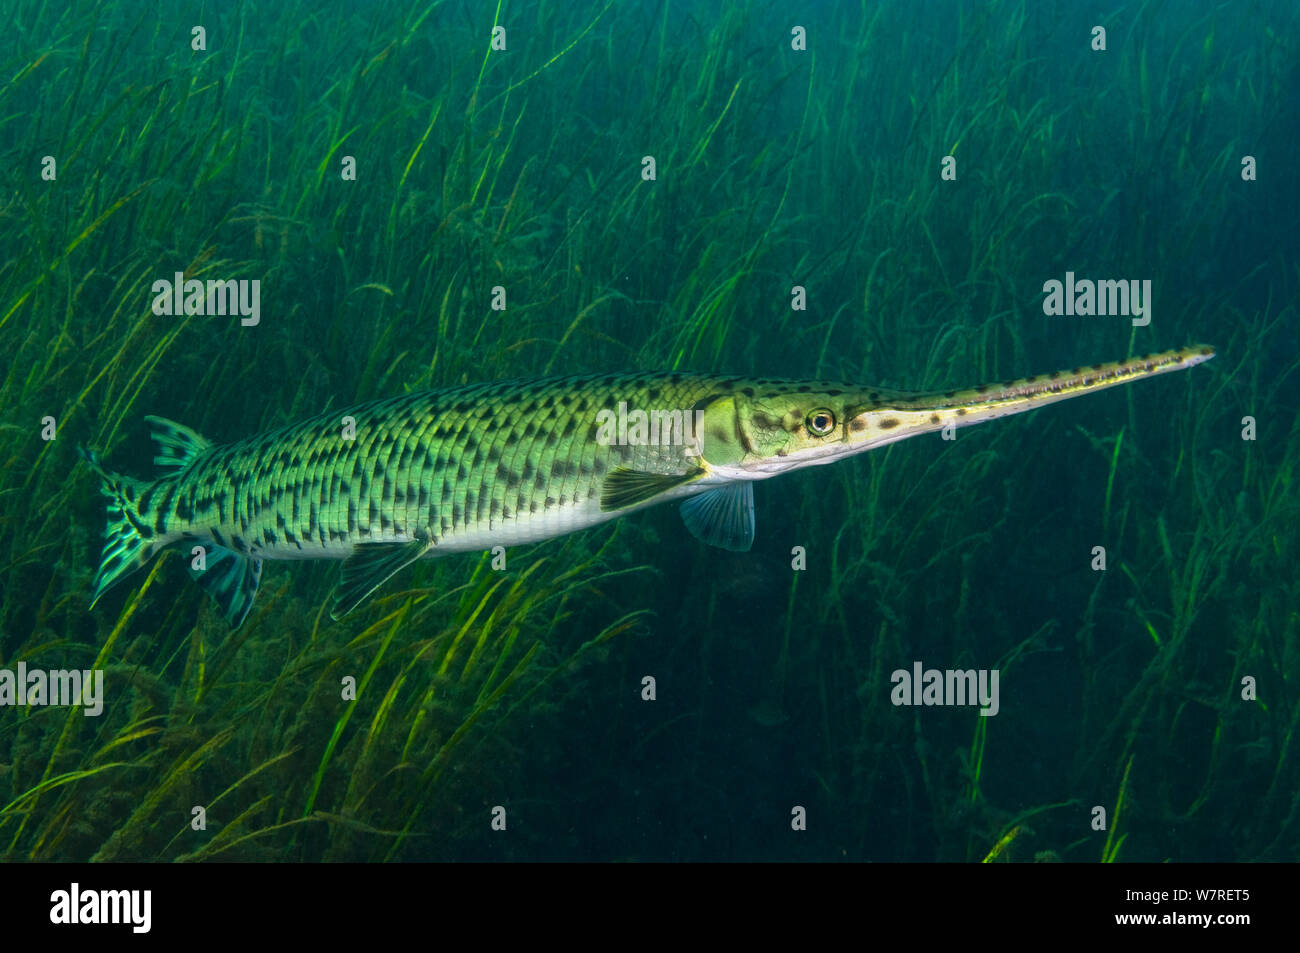 A longnose gar (Lepisosteus osseus) in front of freshwater plants in Rainbow River, Florida, USA. Stock Photo